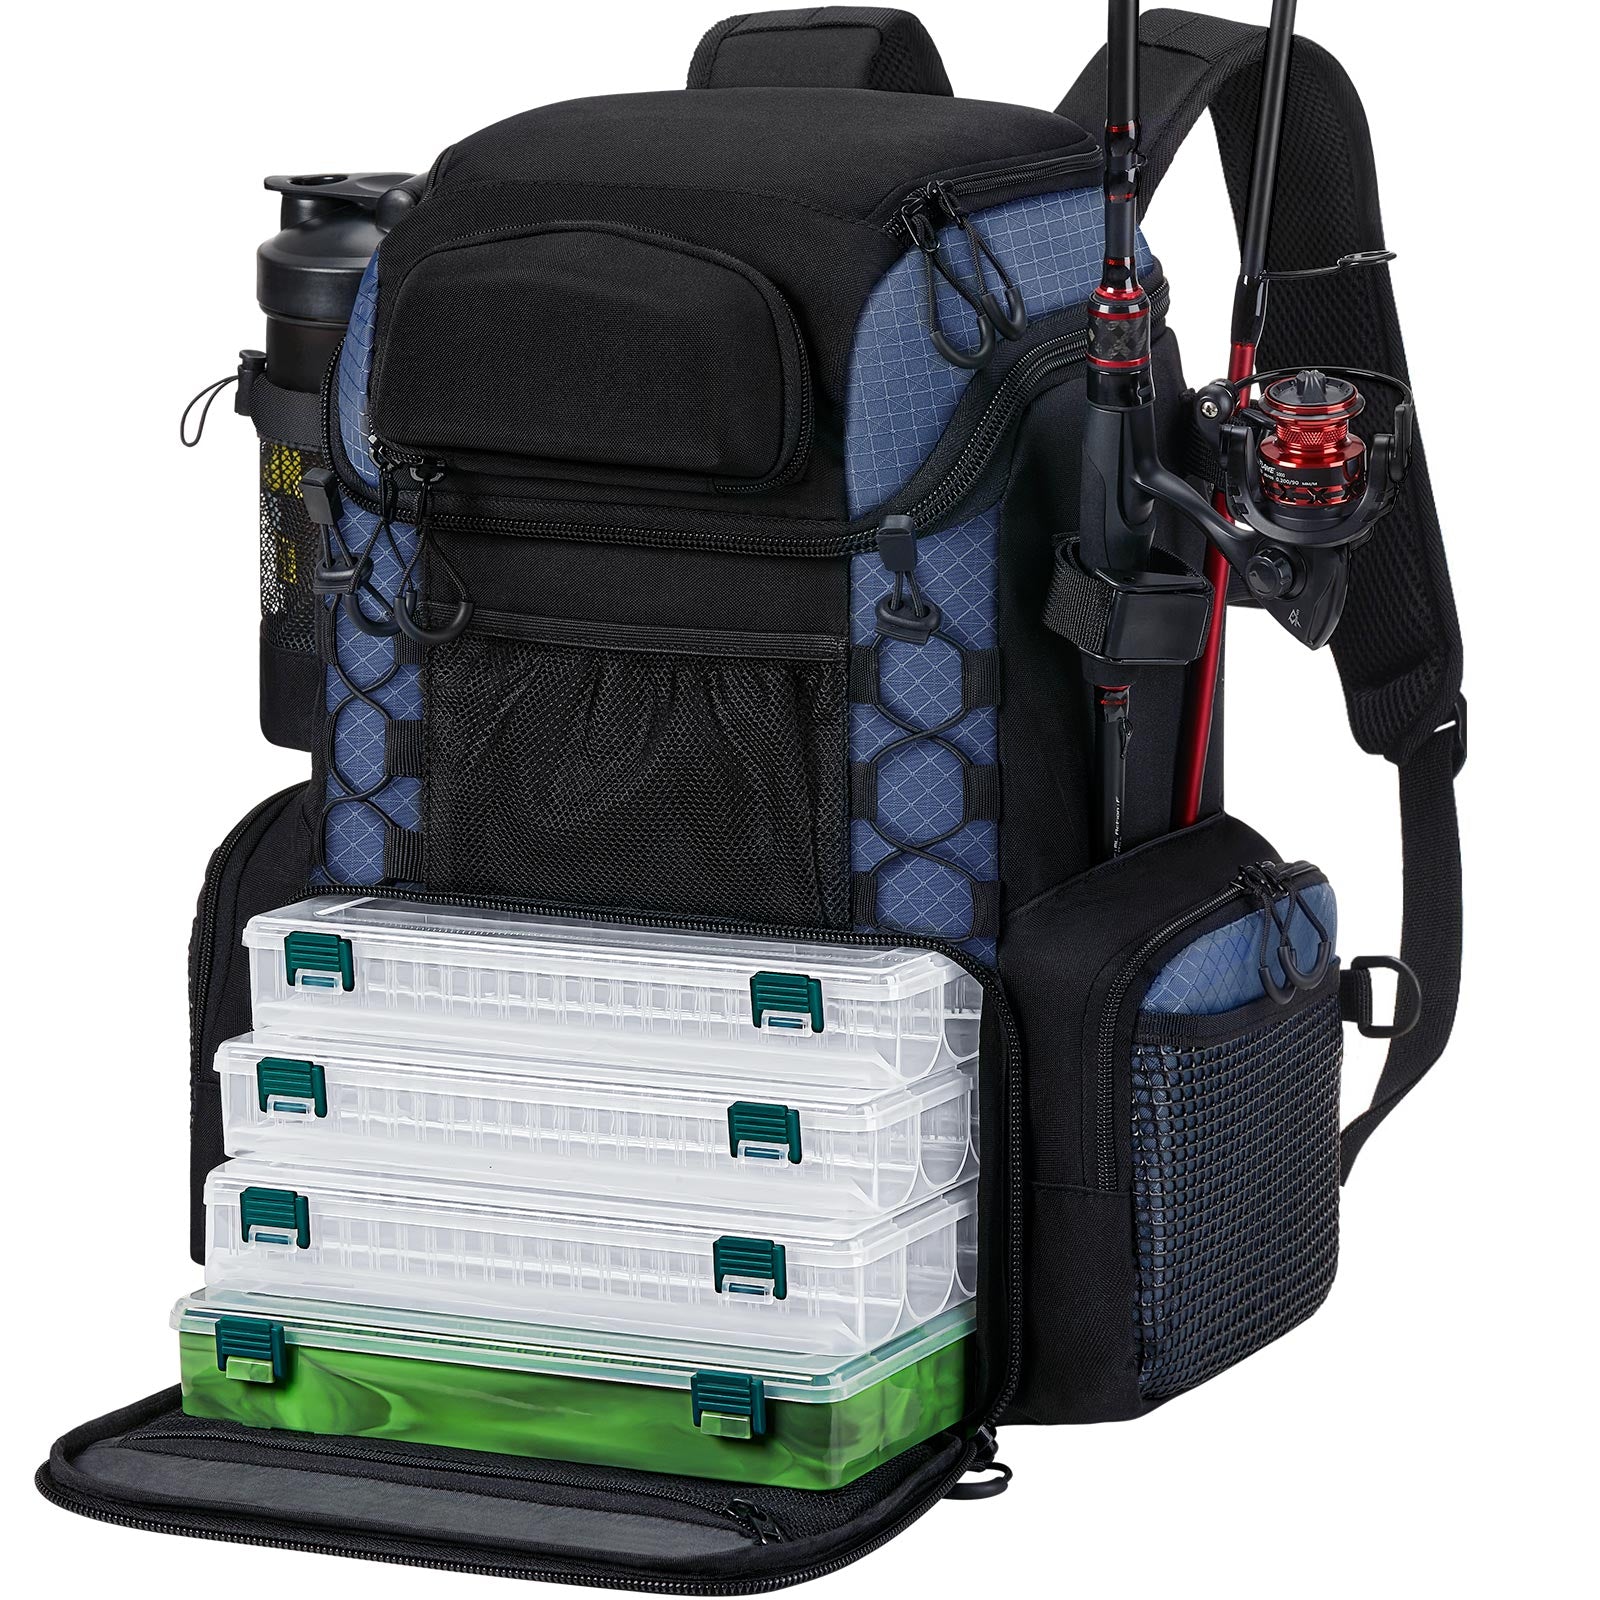 Piscifun Fishing Tackle Backpack Large Fishing Storage Bag With 4 Boxes $74.99 (reg $130)